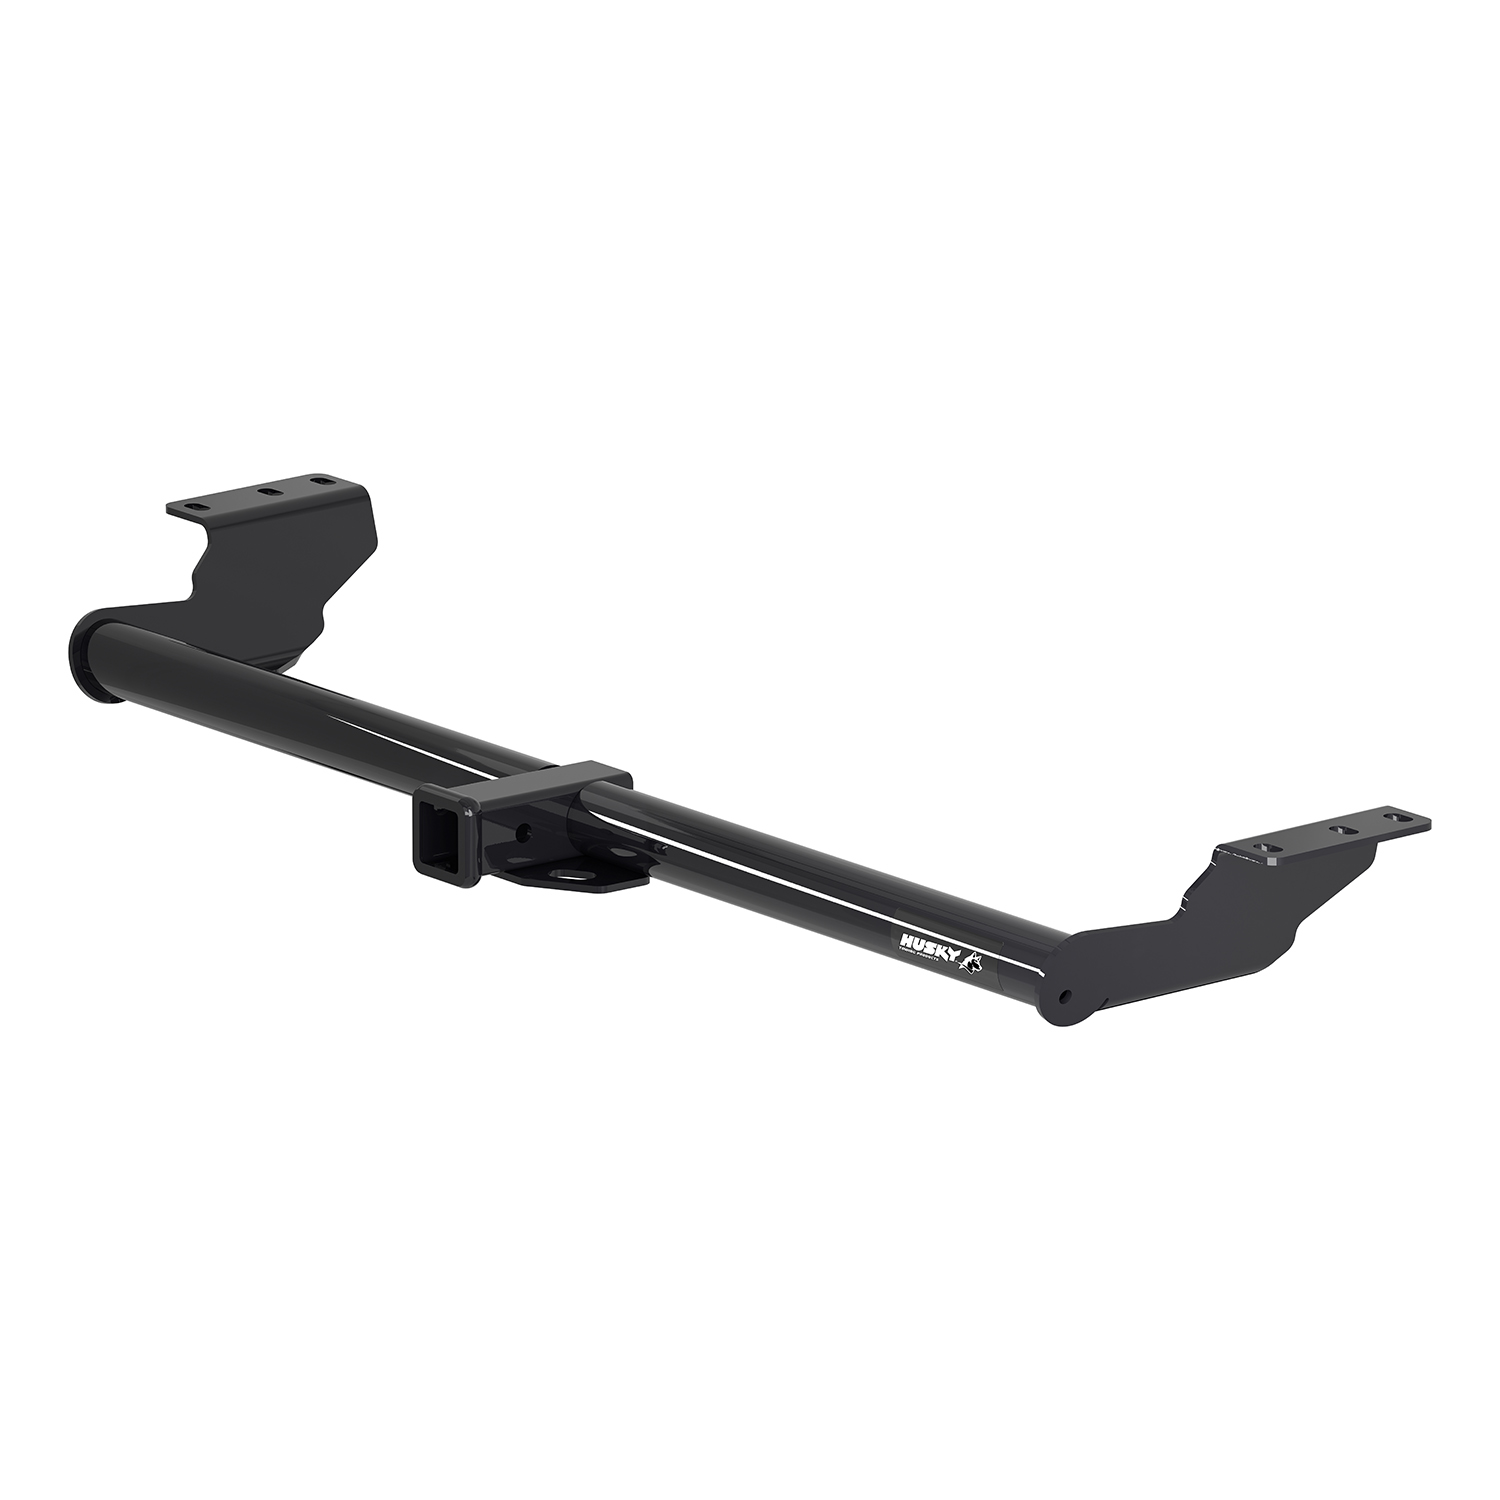 HUSKY TOWING 69634C CLASS 3 TRAILER HITCH WITH 2' RCVR